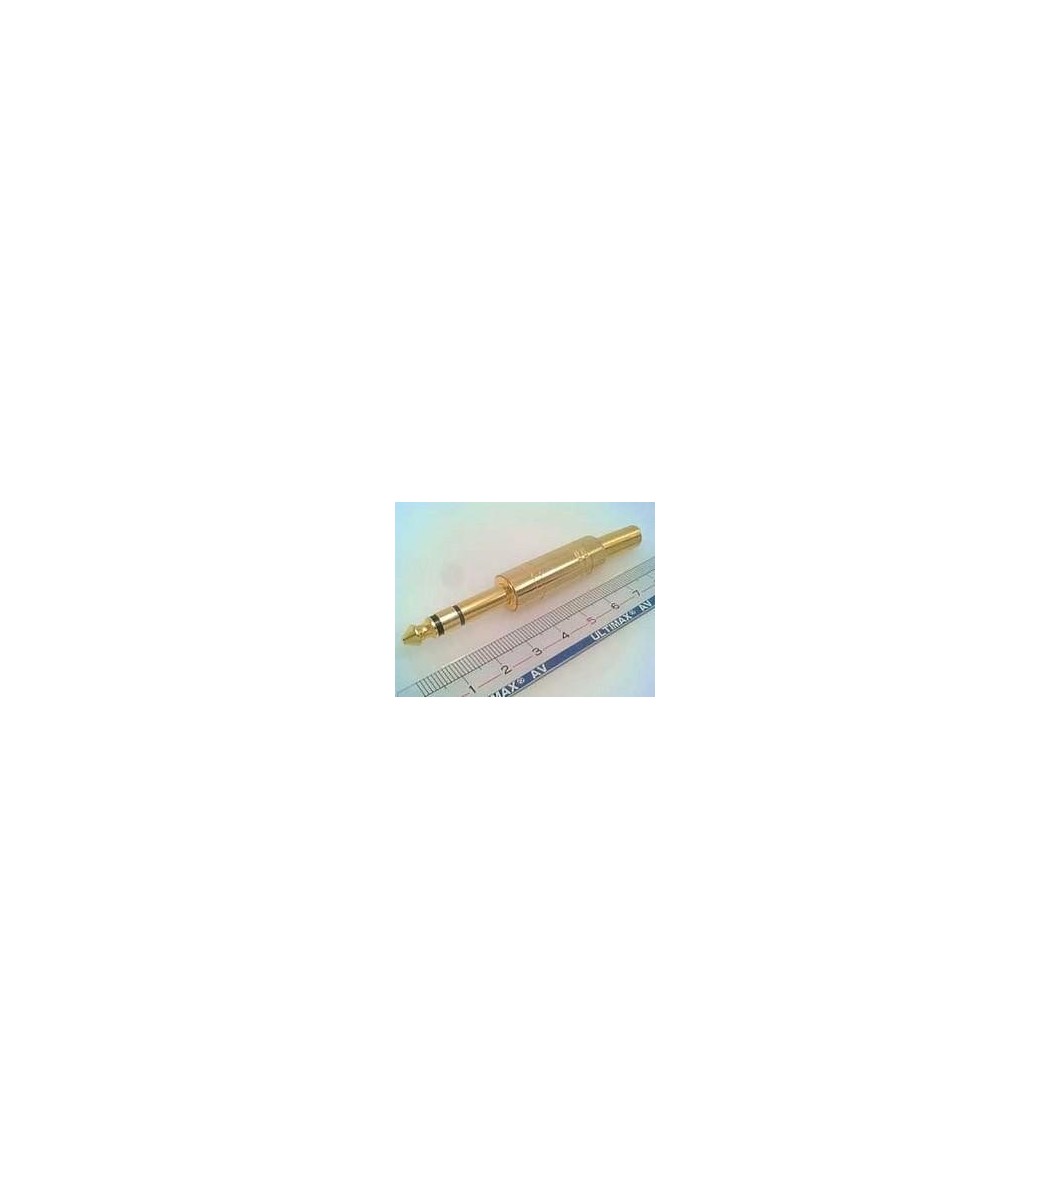 Jack plug, 6.3 mm stereo, gold-plated